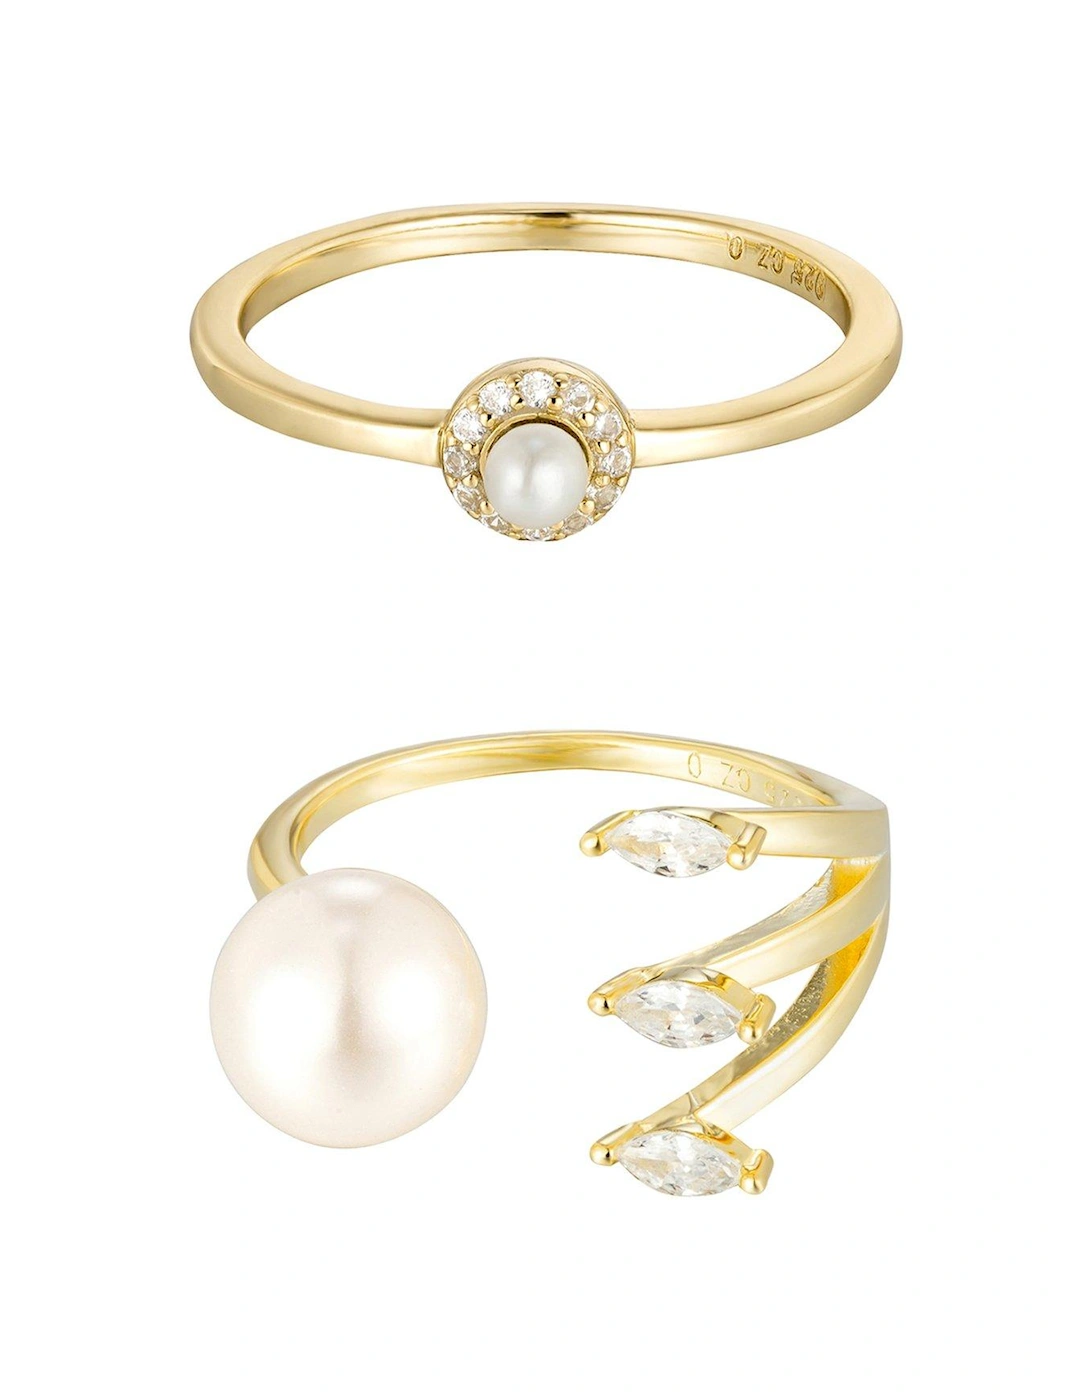 18ct Gold Plated Sterling Silver Pearl and CZ Stacking Ring Set, 2 of 1